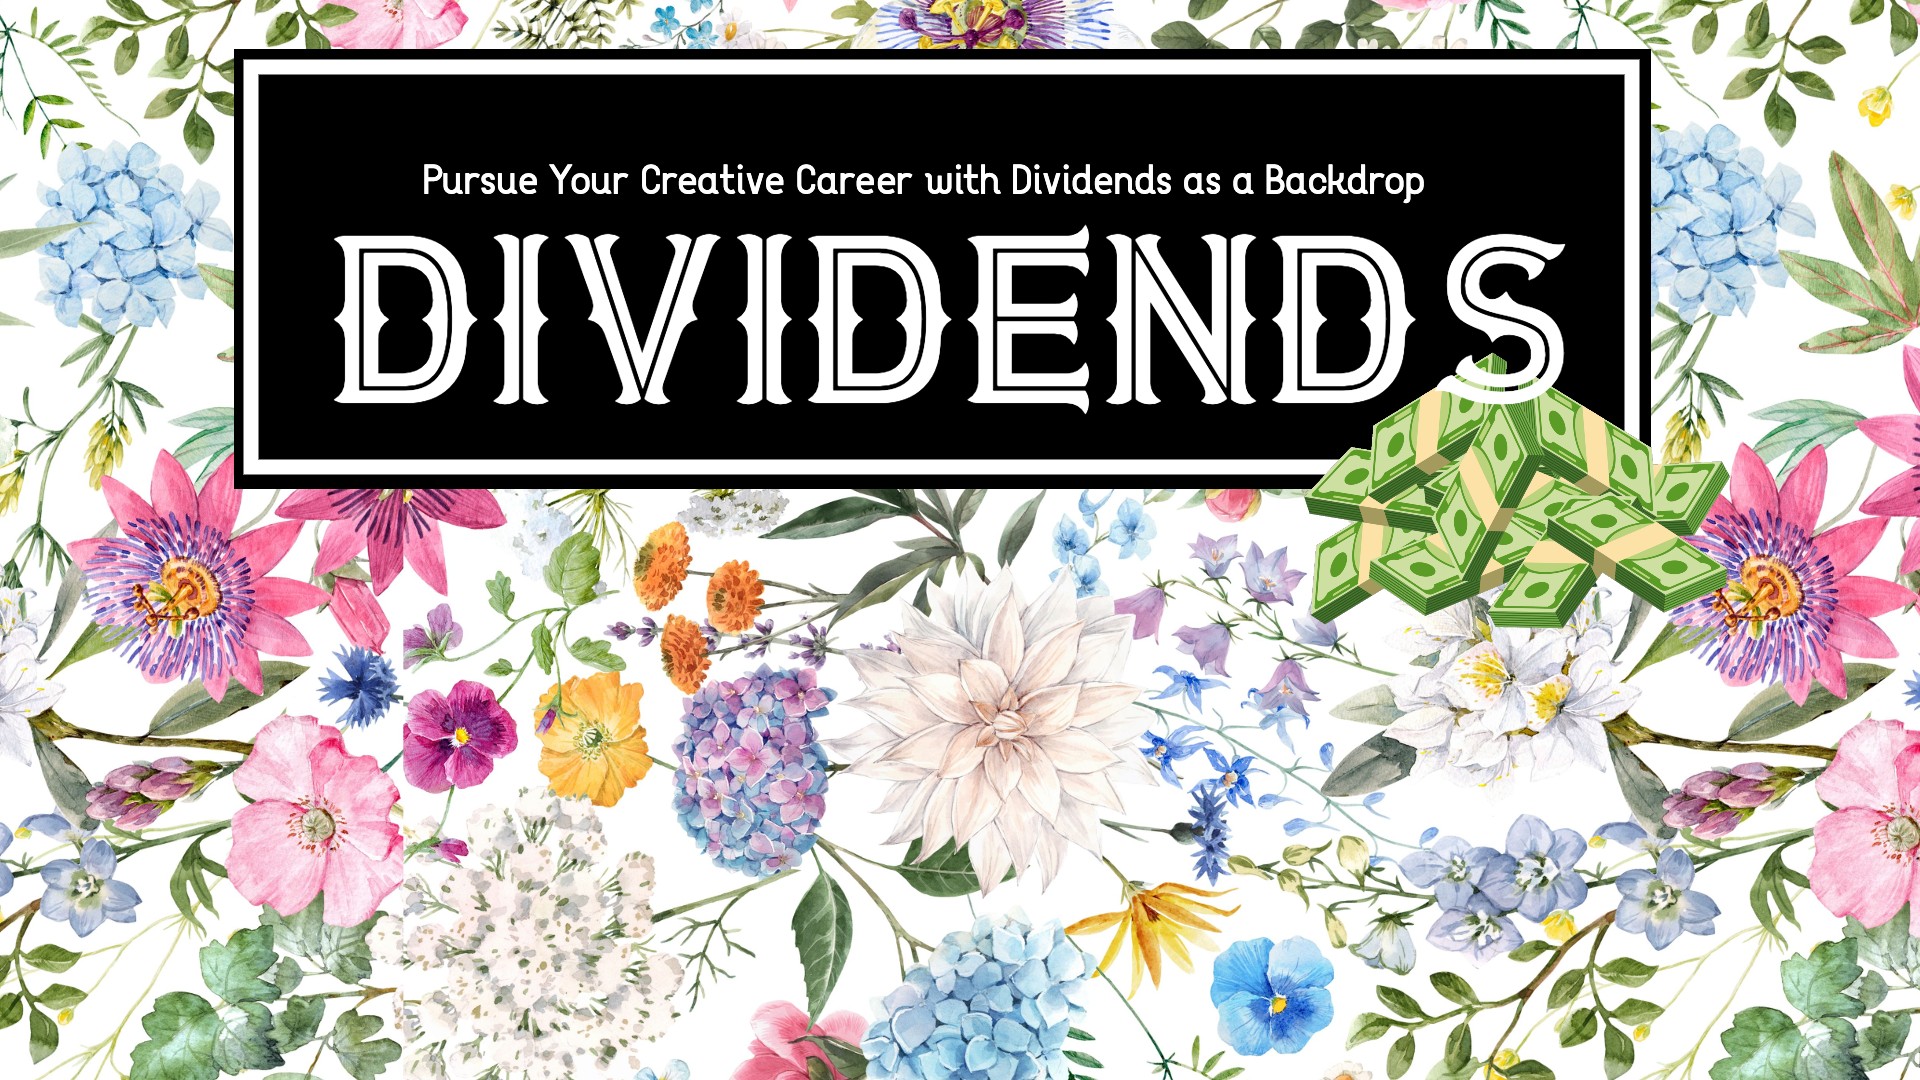 Pursue Your Creative Career with Dividends as a Backdrop